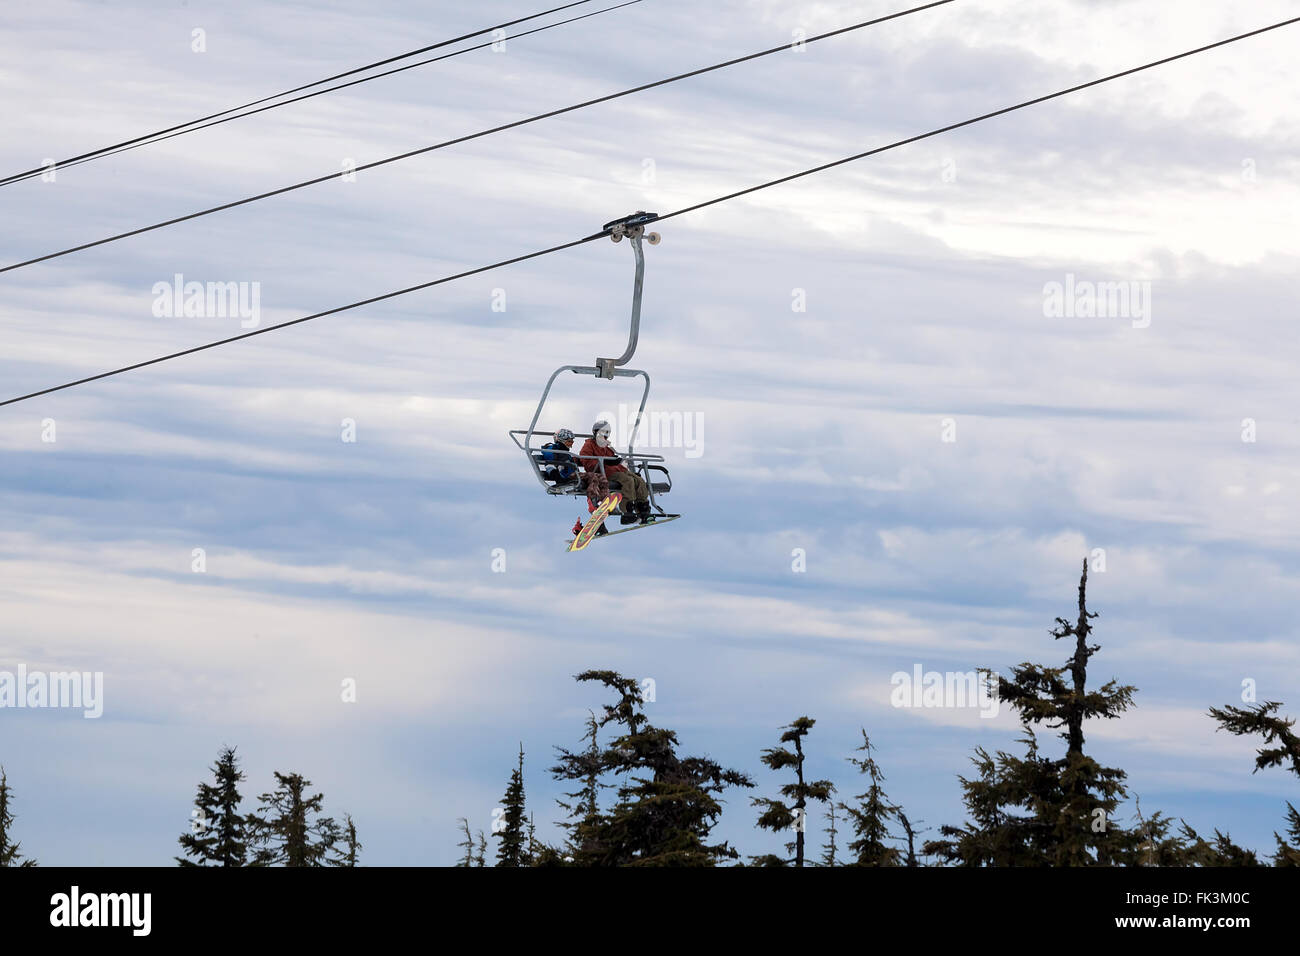 Snowboarders riding Ski Lifts up the slope of Mount Hood in Winter Season Stock Photo